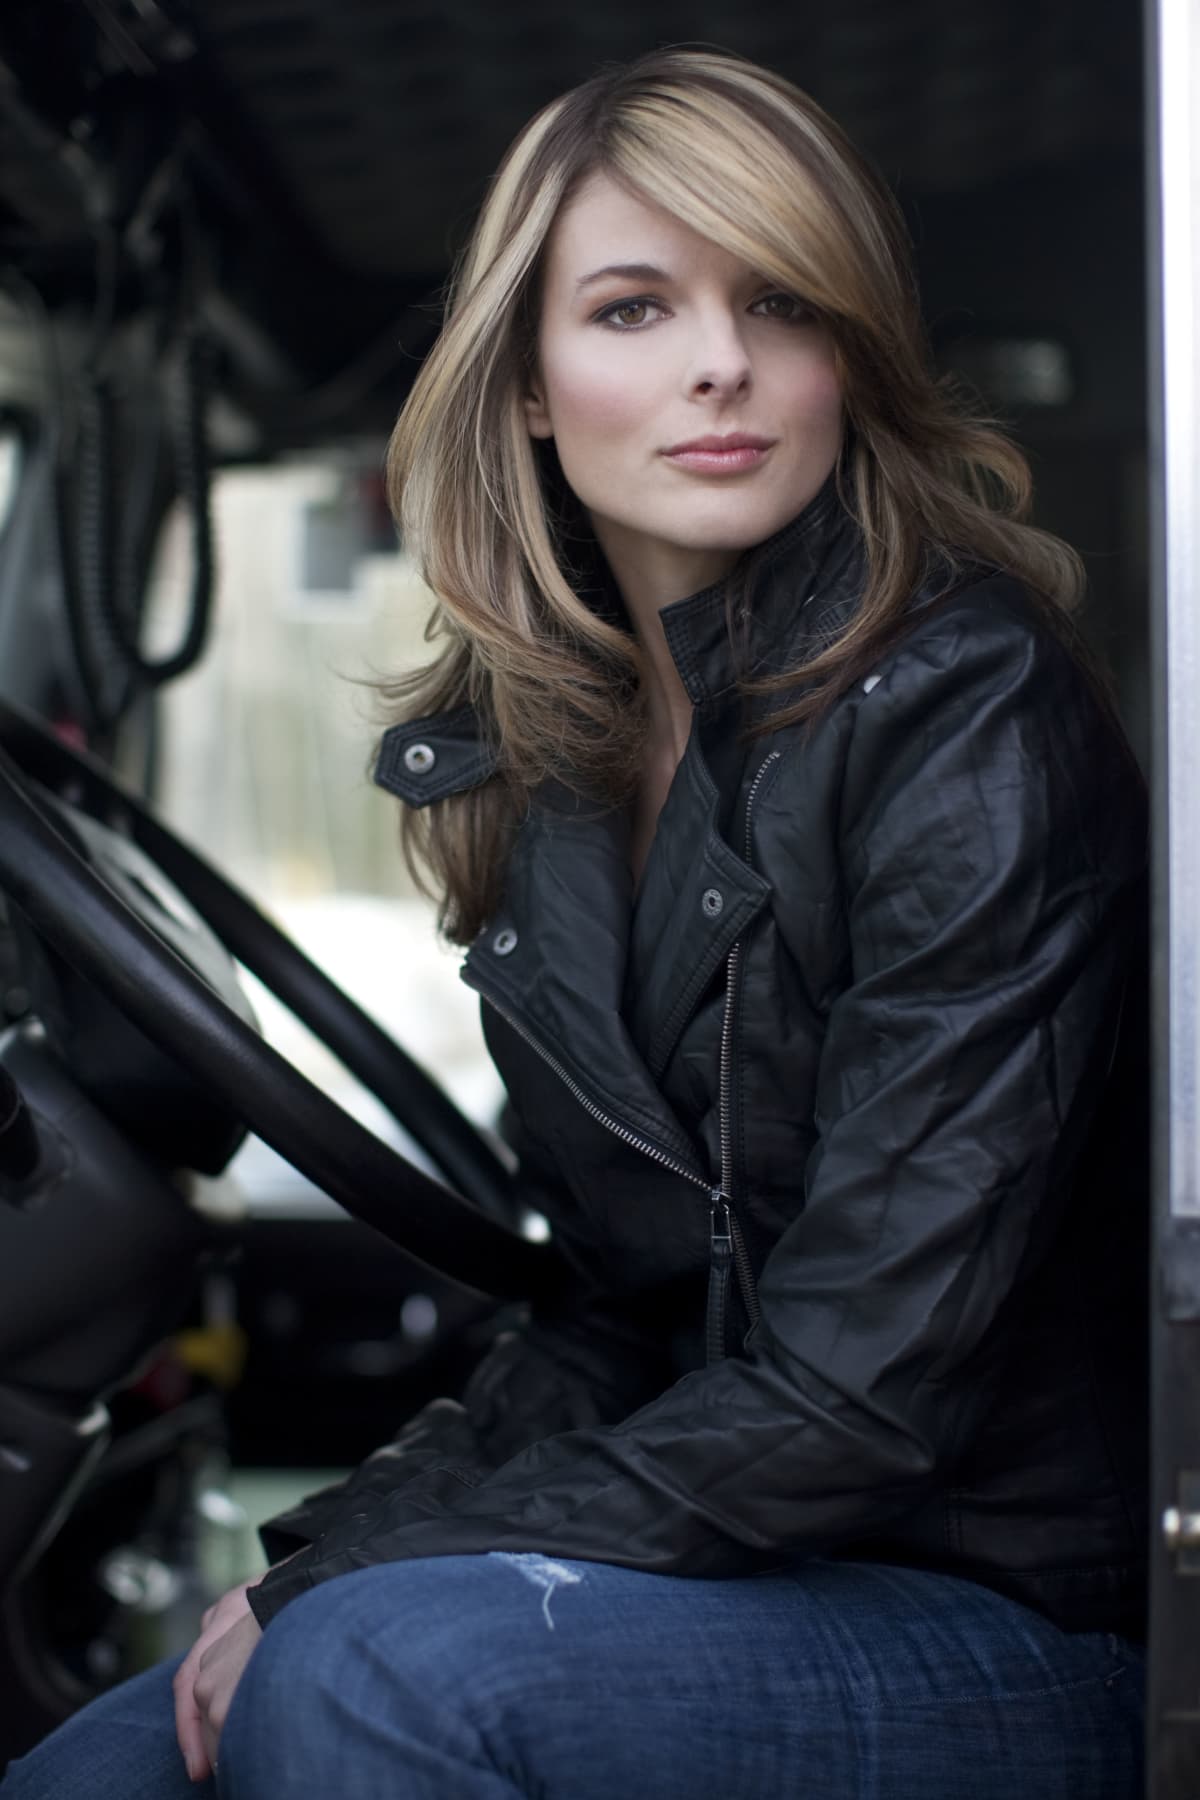 WASILLA, AK - MARCH 22: (EXCLUSIVE ACCESS, Premium Rates Apply, EDITORS NOTE: This image has been retouched) Lisa Kelly, the only female driver for A&E's "Ice Road Truckers", poses during a photo shoot on March 22, 2010 in Wasilla, Alaska. (Photo by Rick Gershon/Getty Images for A&E)